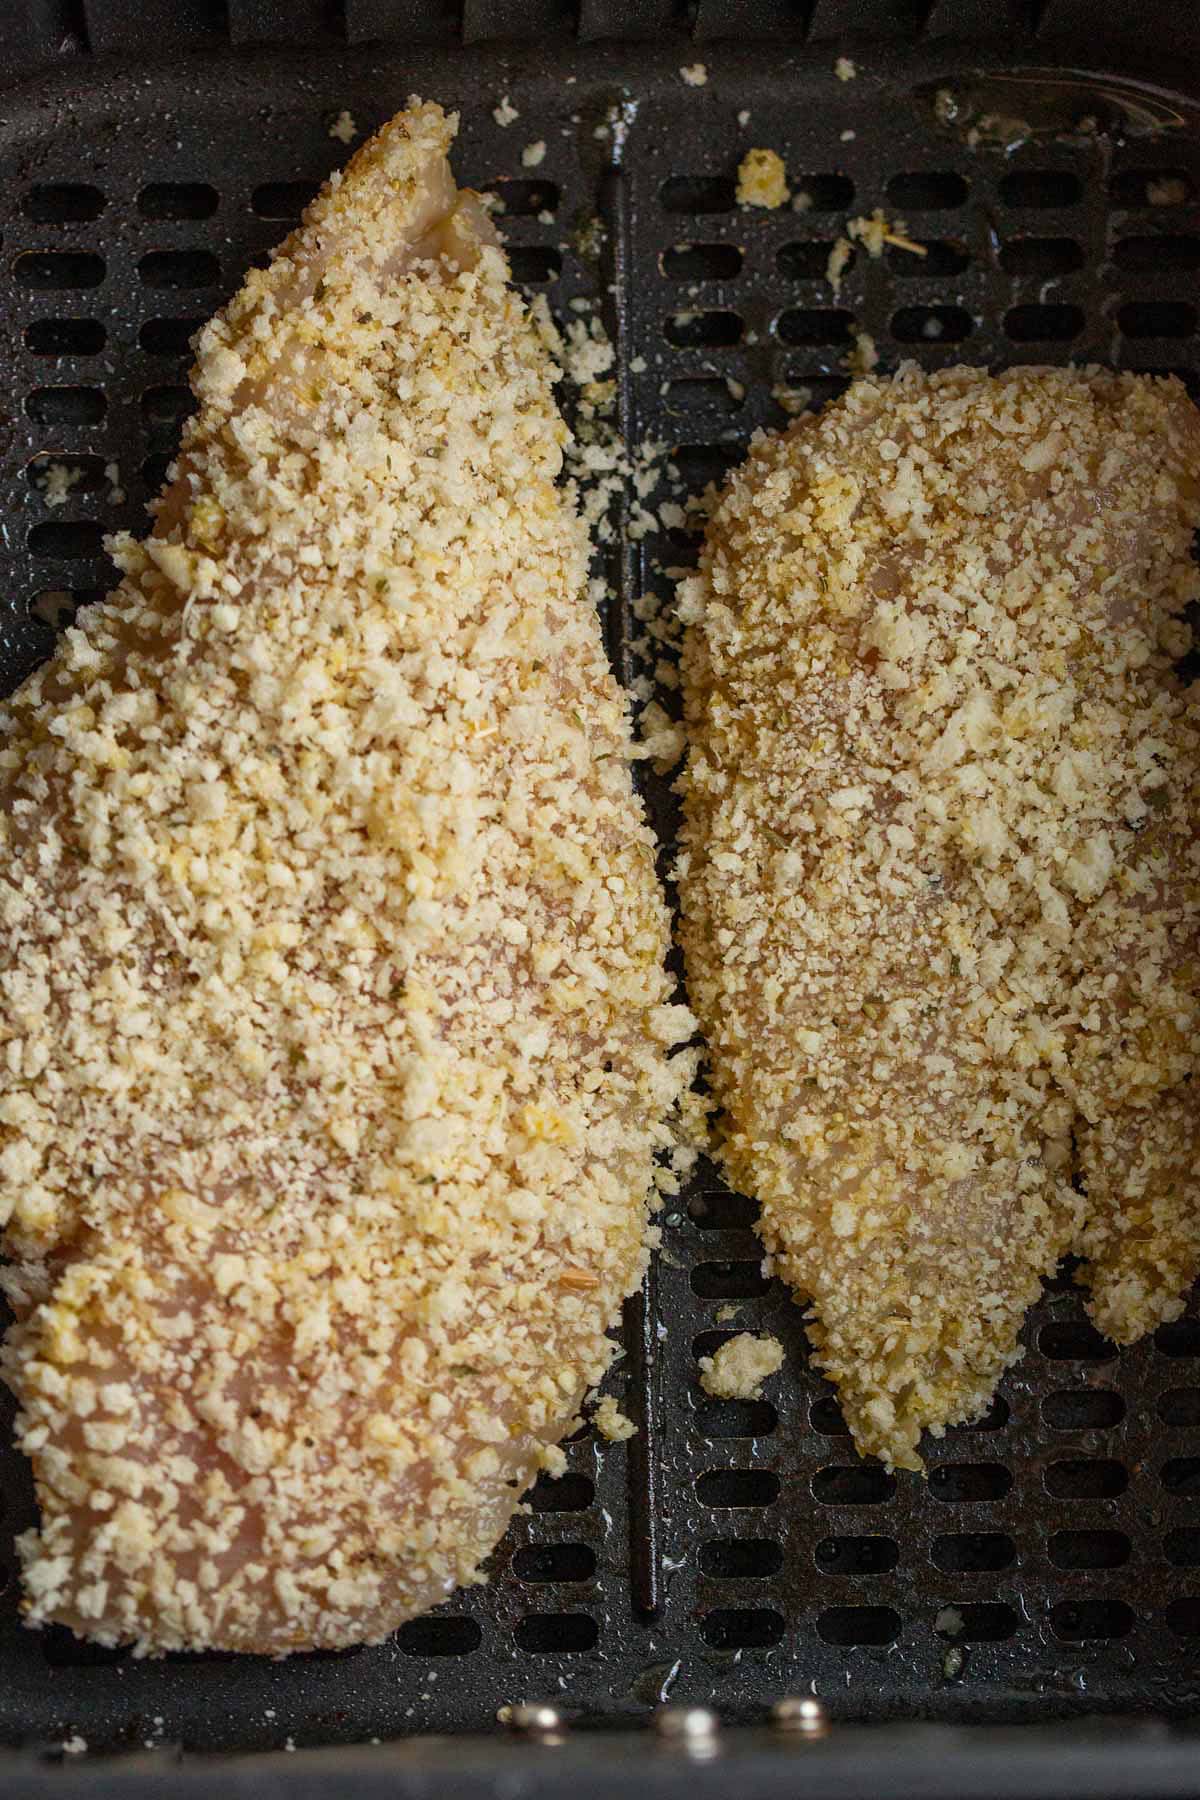 Uncooked air fryer parmesan crusted chicken.